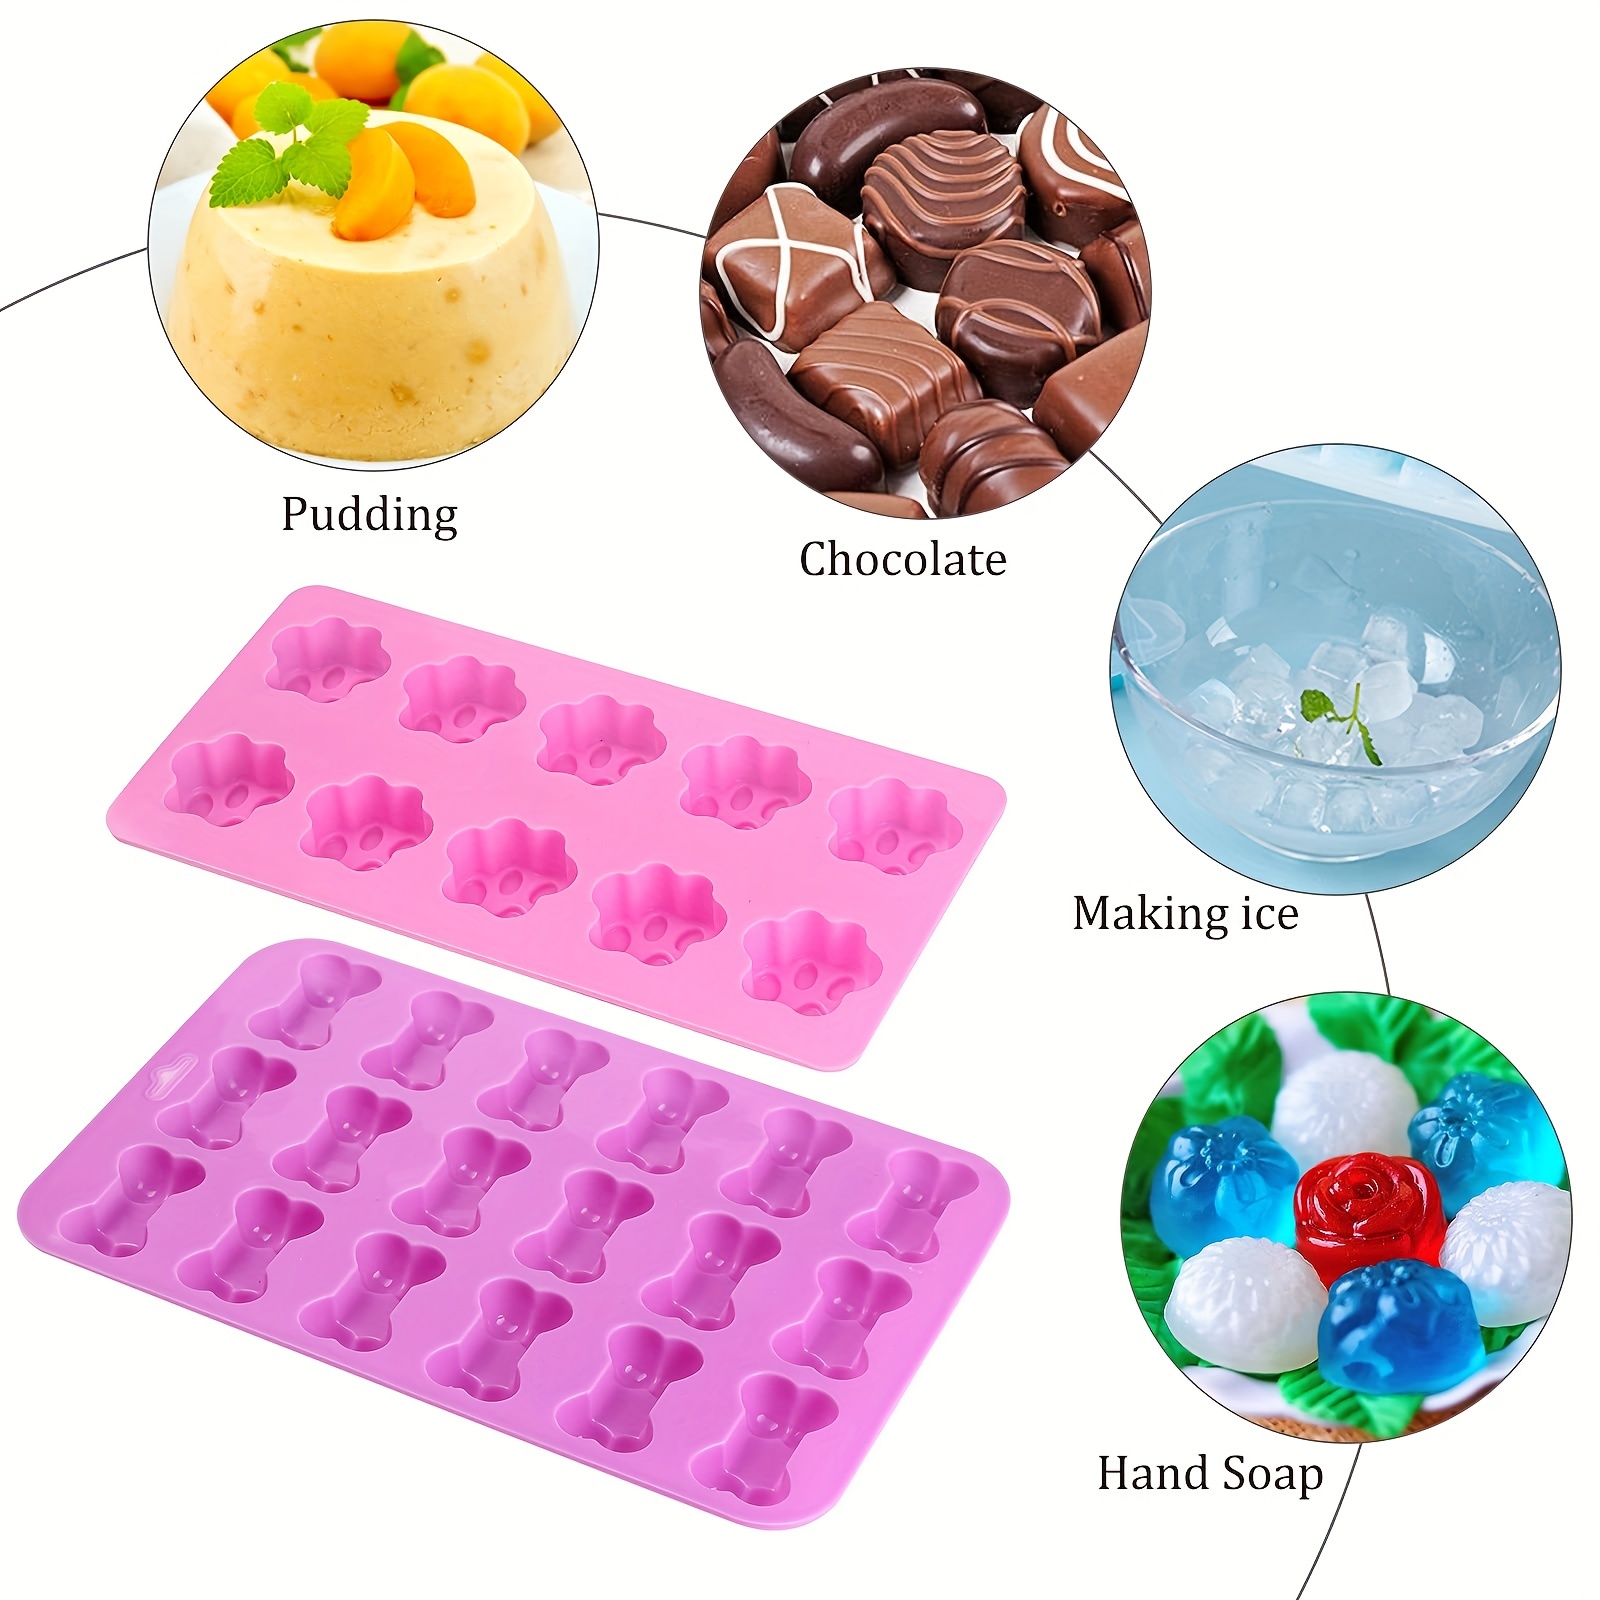 Silicone Gummy Candy Molds, Cartoon Cat Shape Chocolate Molds, Non-Stick  Food Grade Mini Silicone Molds to Make Chocolate, Cake, Candy, Dog Treats,  Pudding,Jelly and Cute Snacks for Party,Christmas 